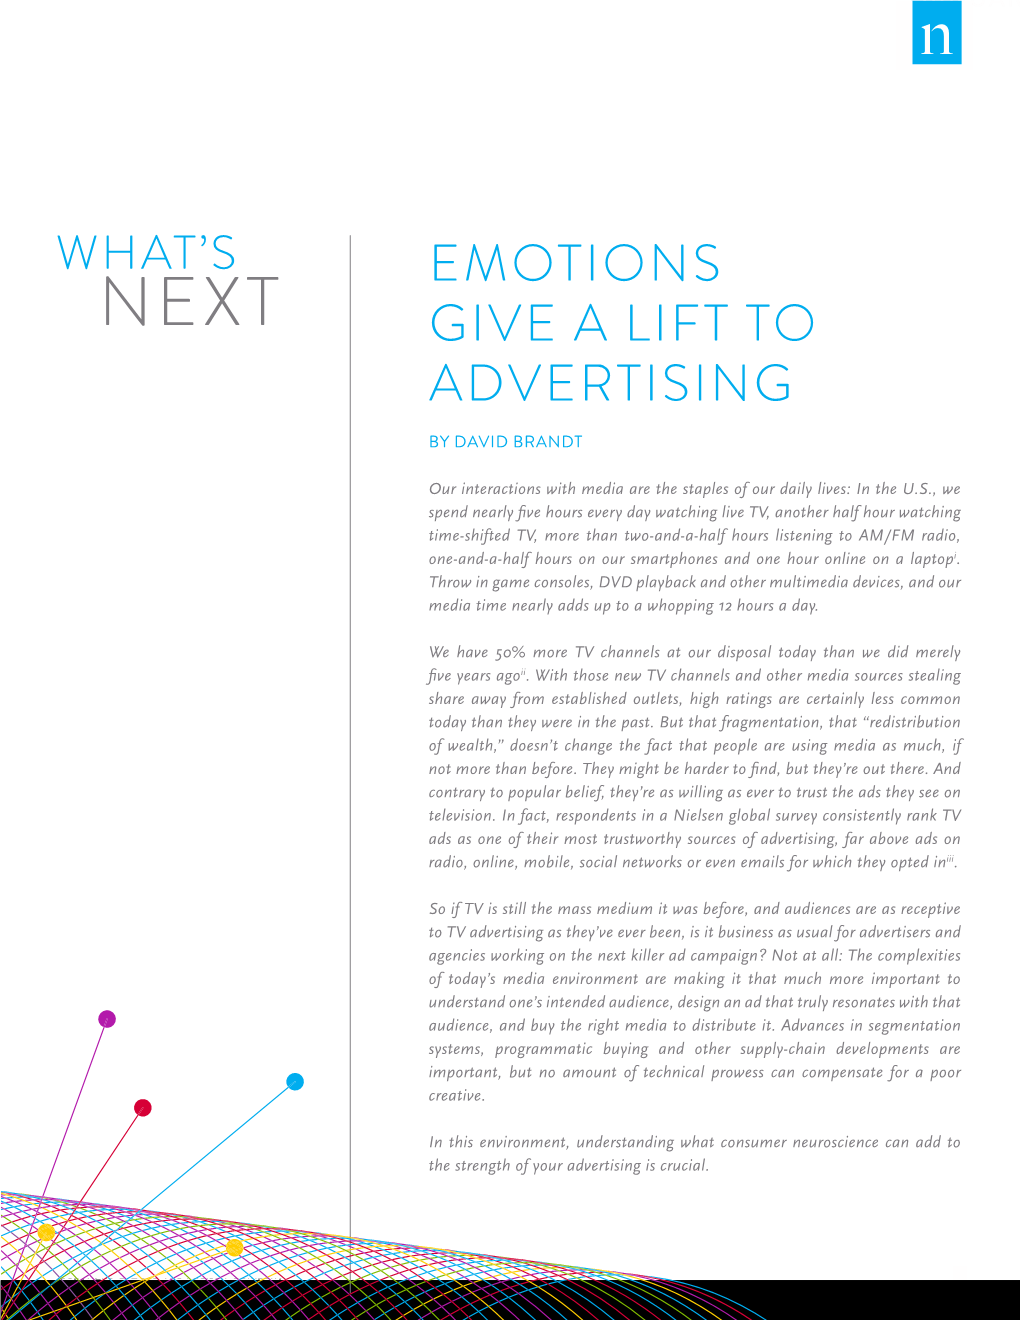 EMOTIONS Give a LIFT to ADVERTISING 2 THERE IS SUCH a THING AS BAD ADVERTISING